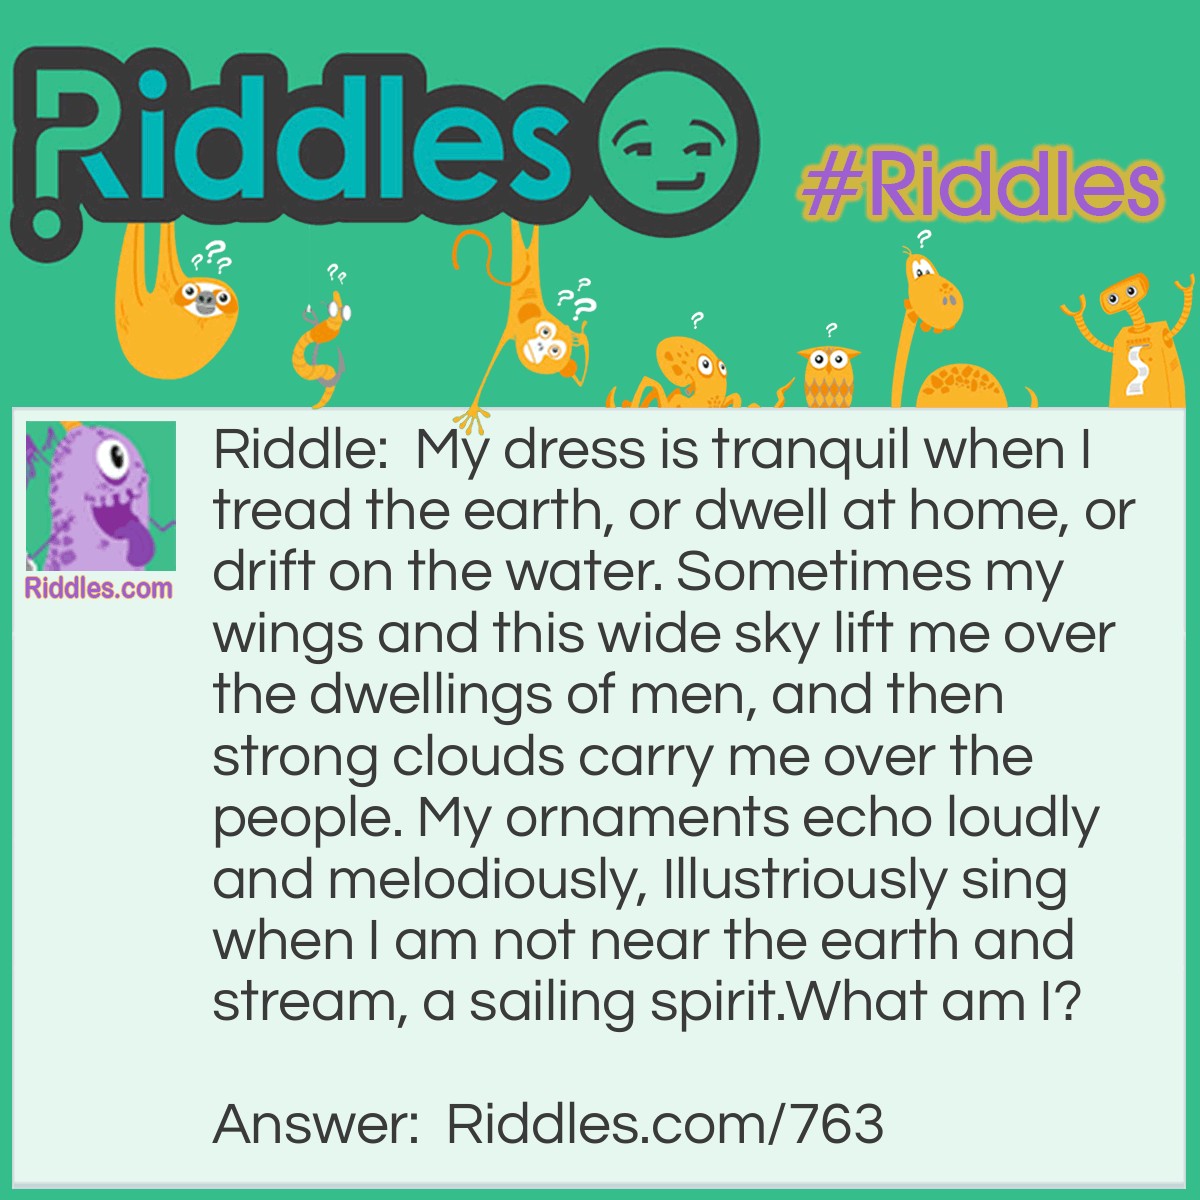 Riddle: My dress is tranquil when I tread the earth, or dwell at home, or drift on the water. Sometimes my wings and this wide sky lift me over the dwellings of men, and then strong clouds carry me over the people. My ornaments echo loudly and melodiously, Illustriously sing when I am not near the earth and stream, a sailing spirit.
What am I? Answer: A swan.